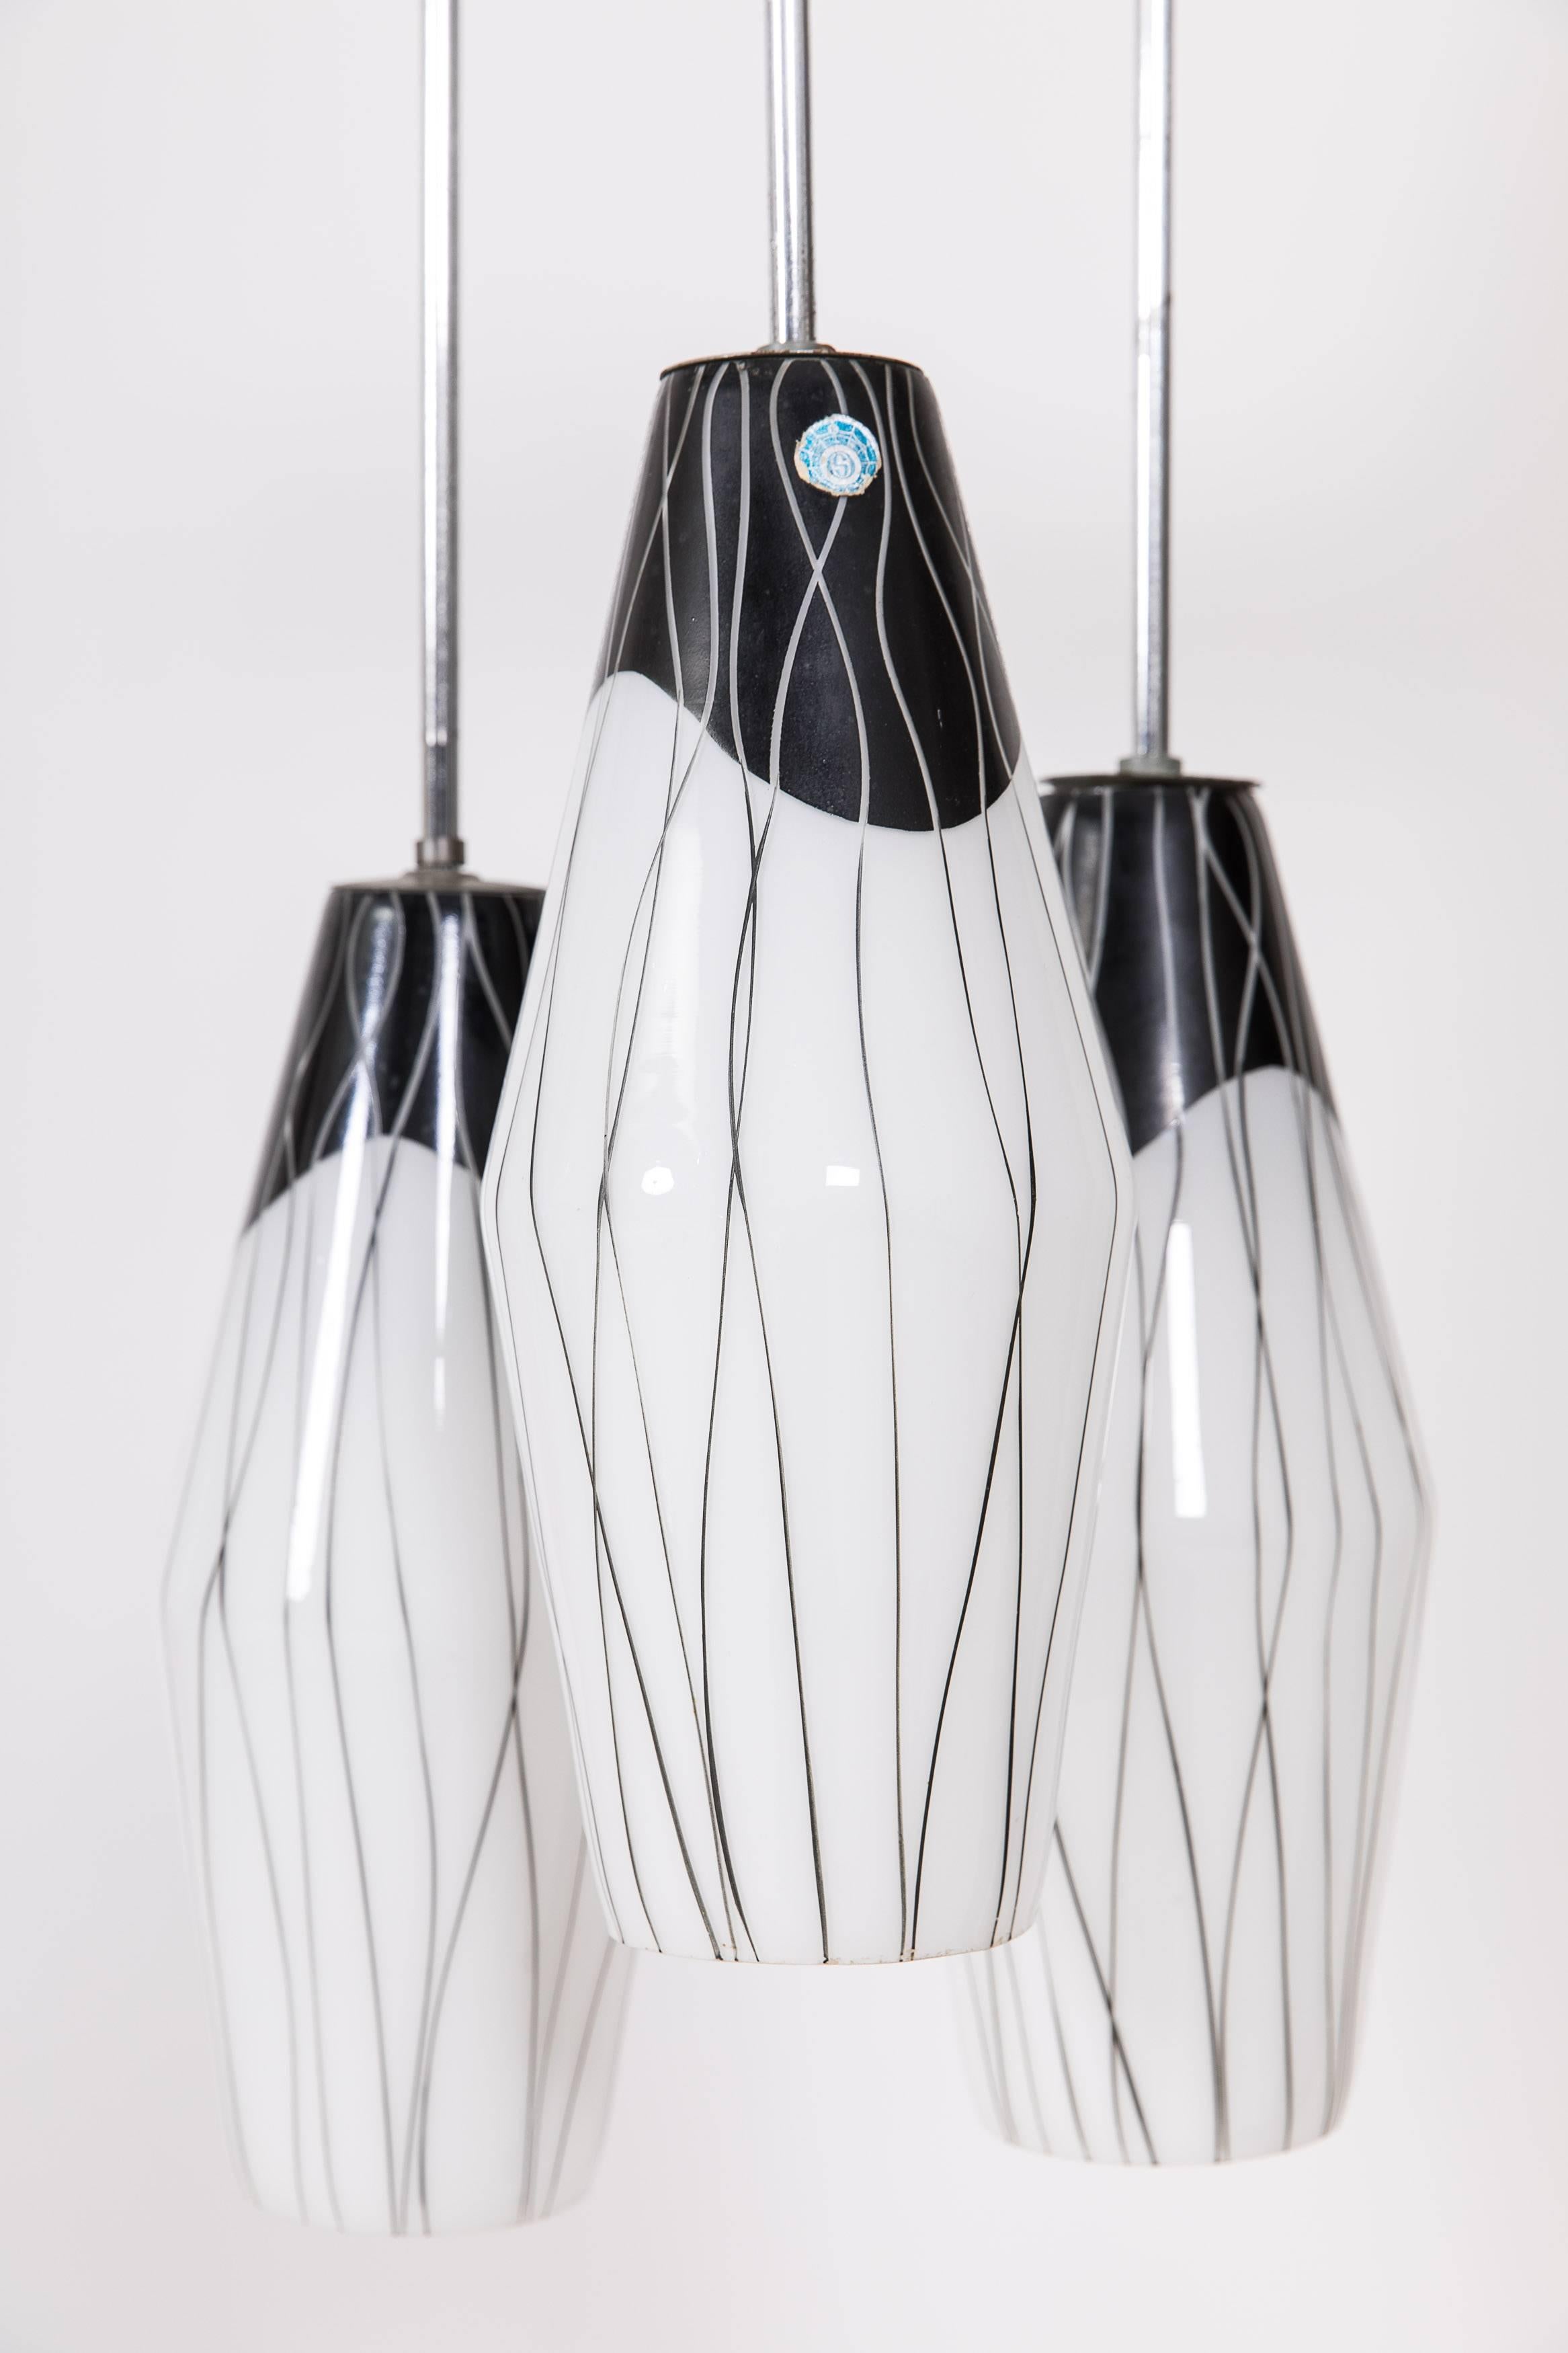 Pendant light made by Zukov lighting factory in the 1960s. Three painted glass cones with a height of 35cm and a diameter of 9cm. The glass cones are mounted on a chrome frame with a total height of 70cm.

This pendant light is suitable for E27